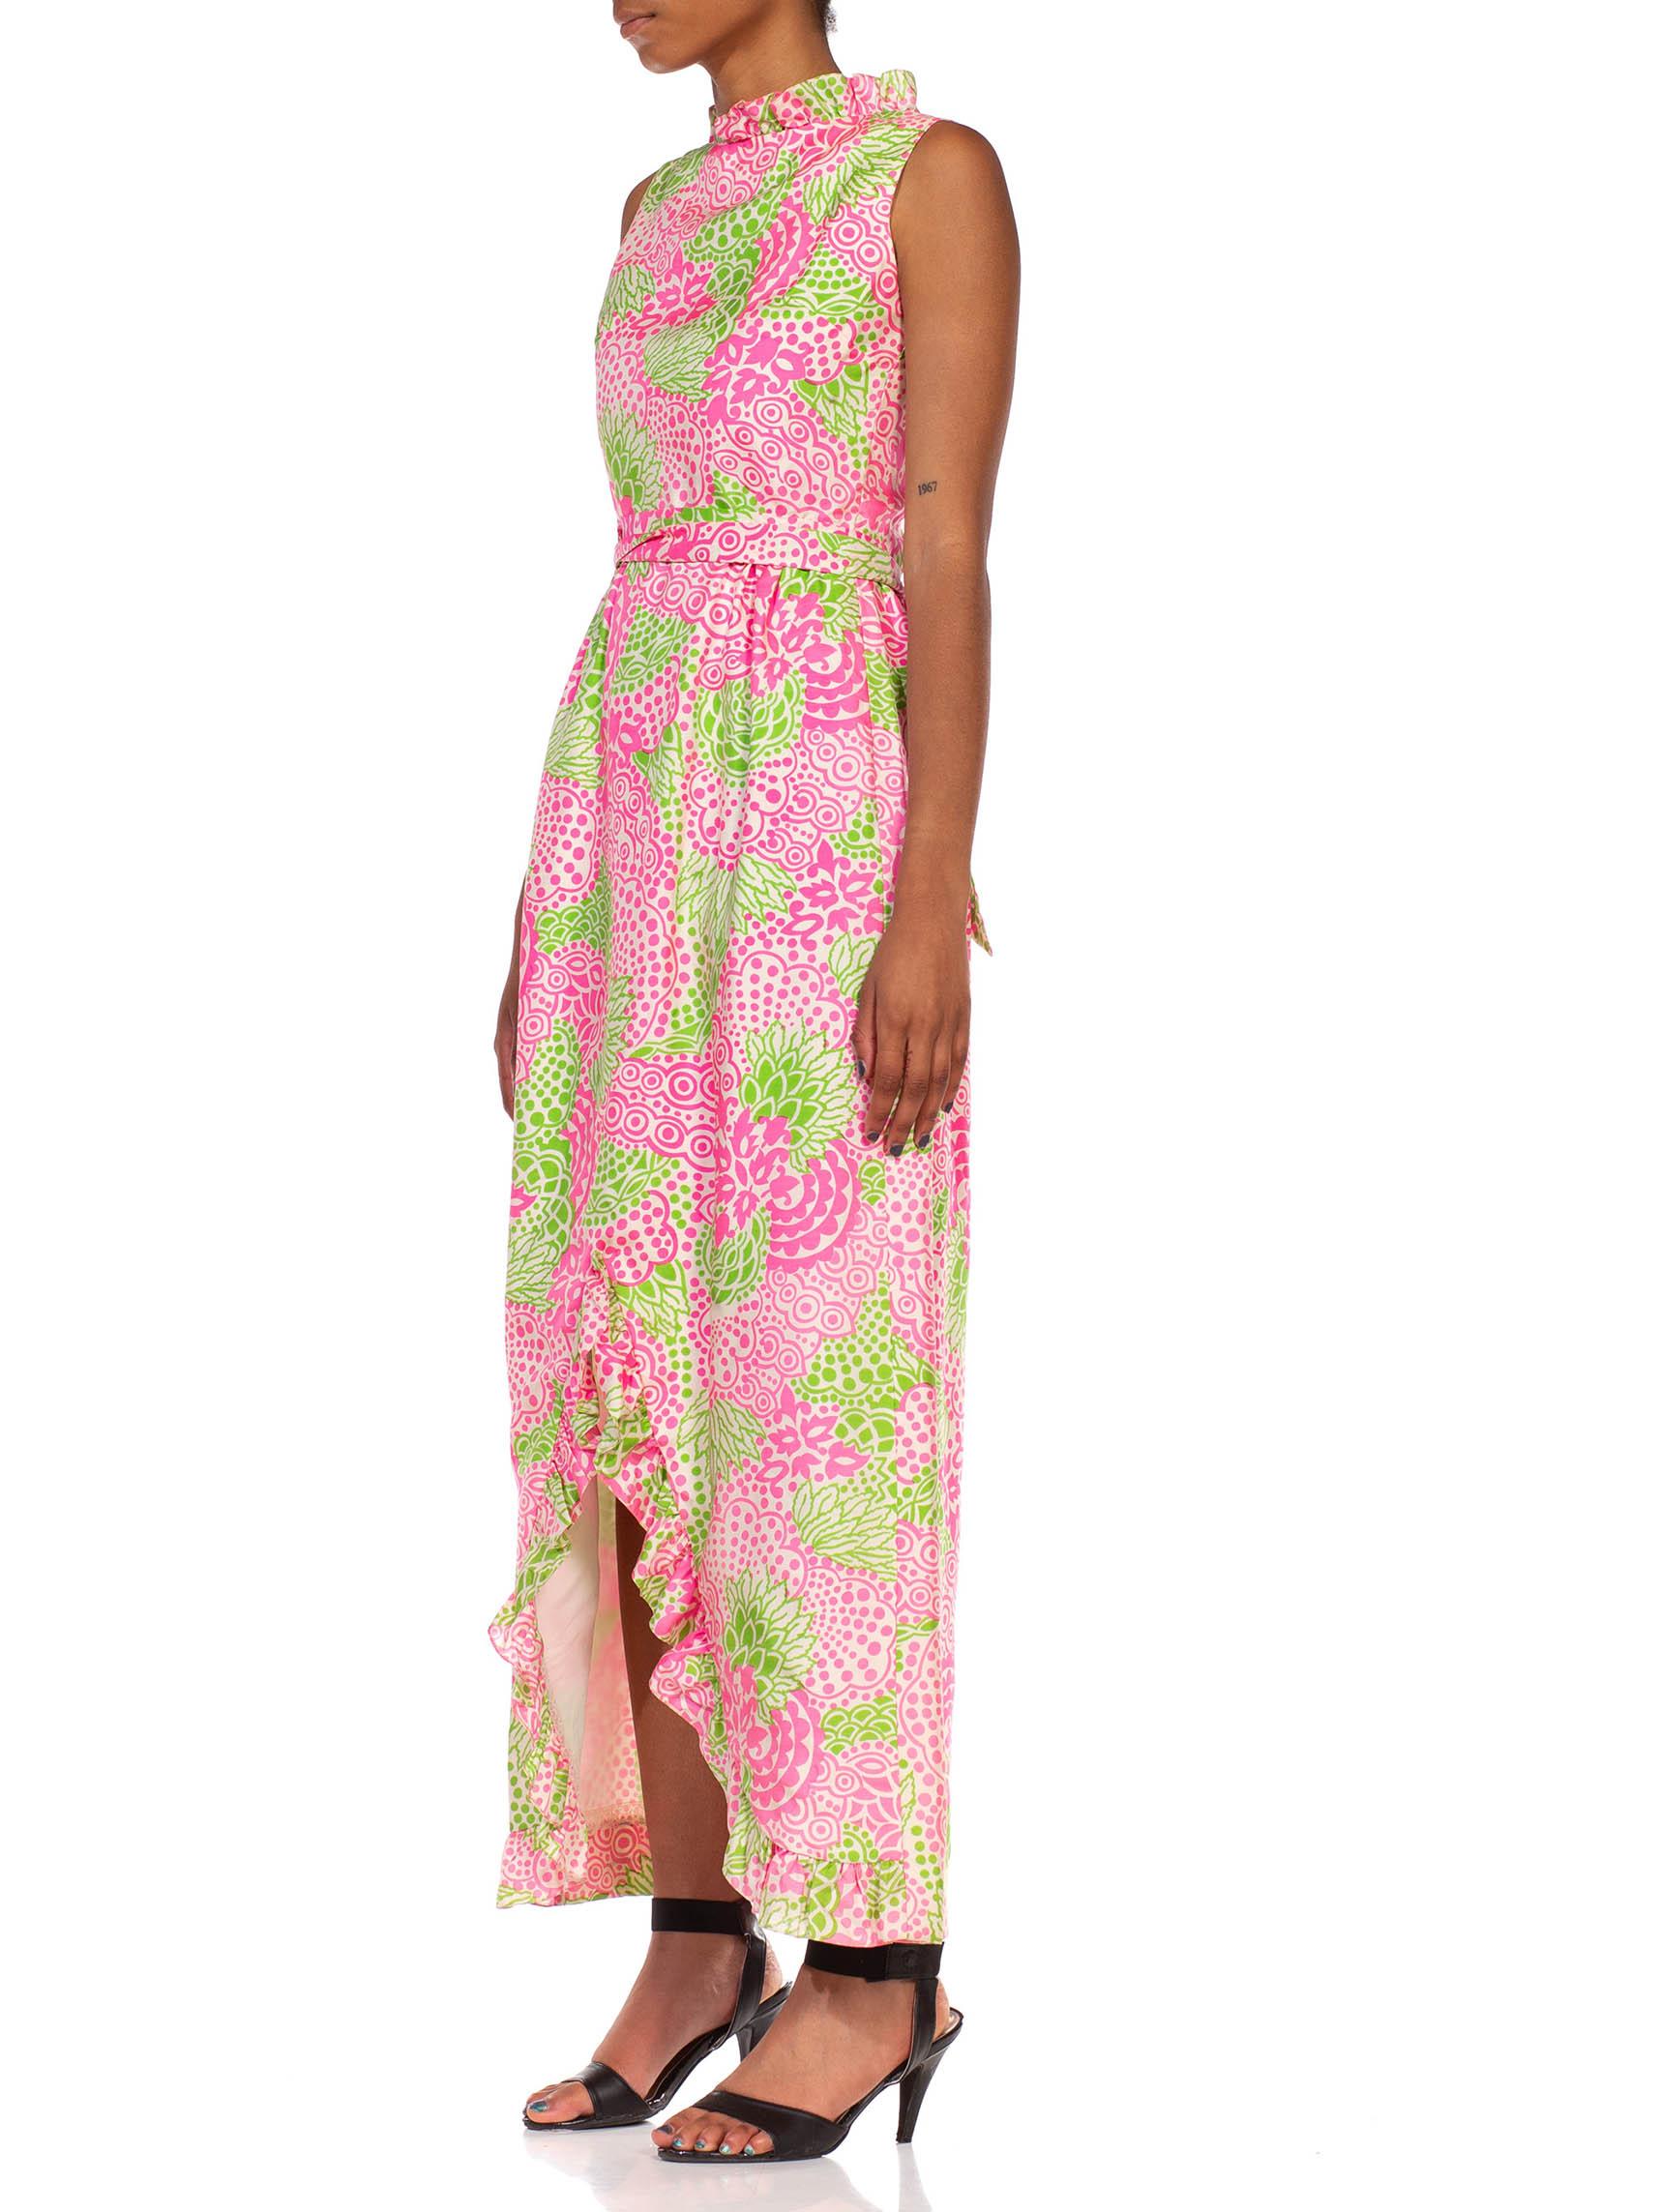 1960S LILLY PULITZER Style Pink & Green Cotton Sleeveless Maxi Dress With Sash Belt